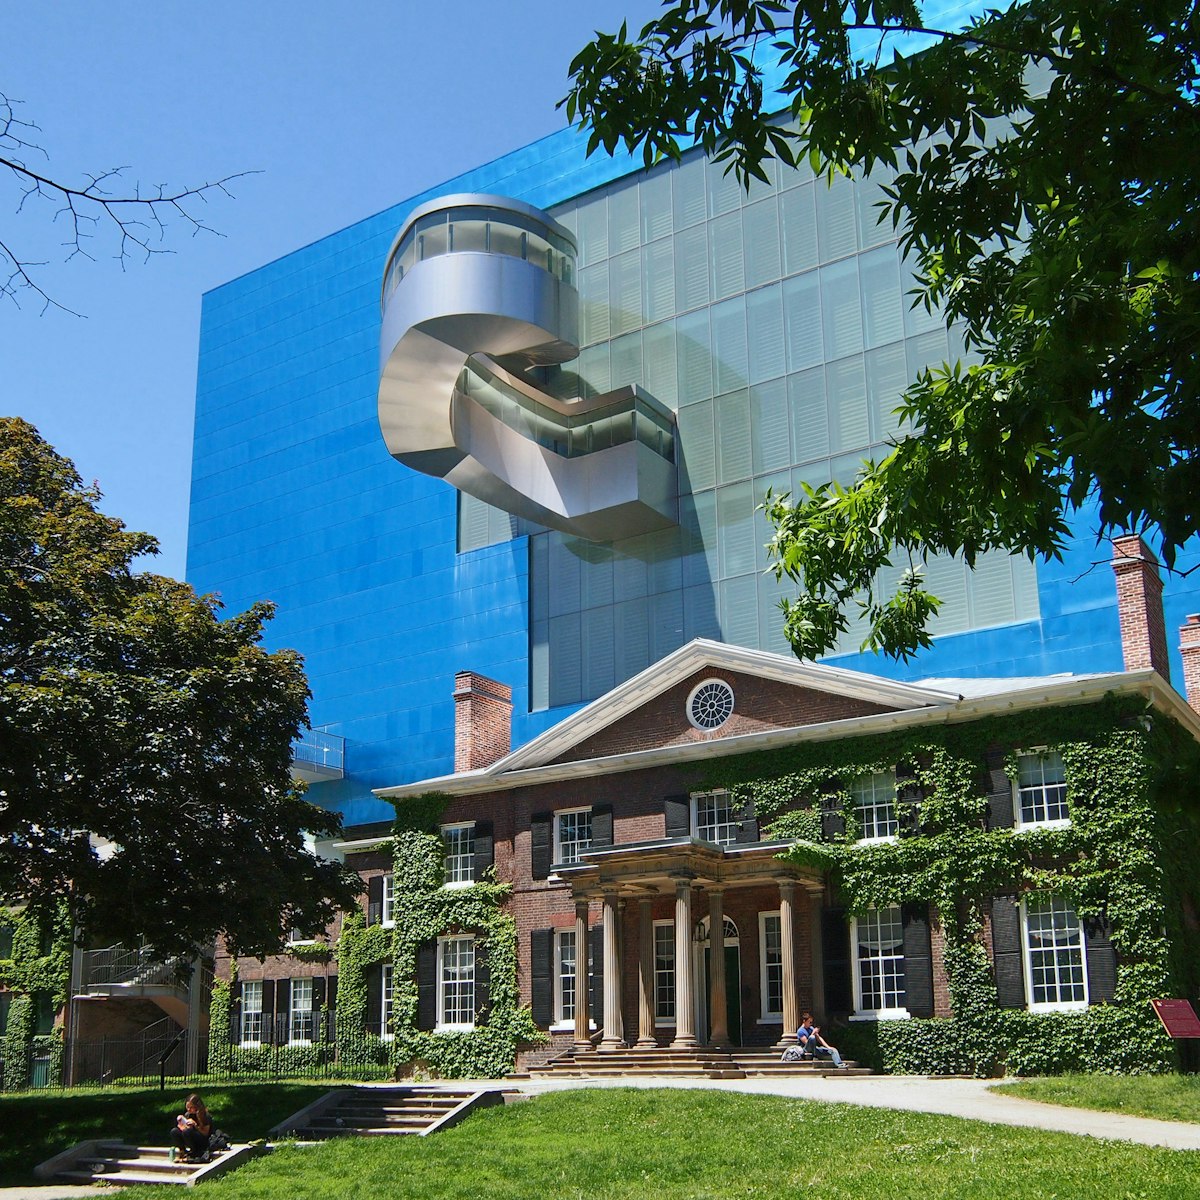 June 4, 2013: Exterior of the Art Gallery of Ontario with a Victorian mansion and a controversial modern addition by architect Frank Gehry.
141690523
art gallery of ontario, building exterior, frank gehry, modern architecture, park, toronto, tree